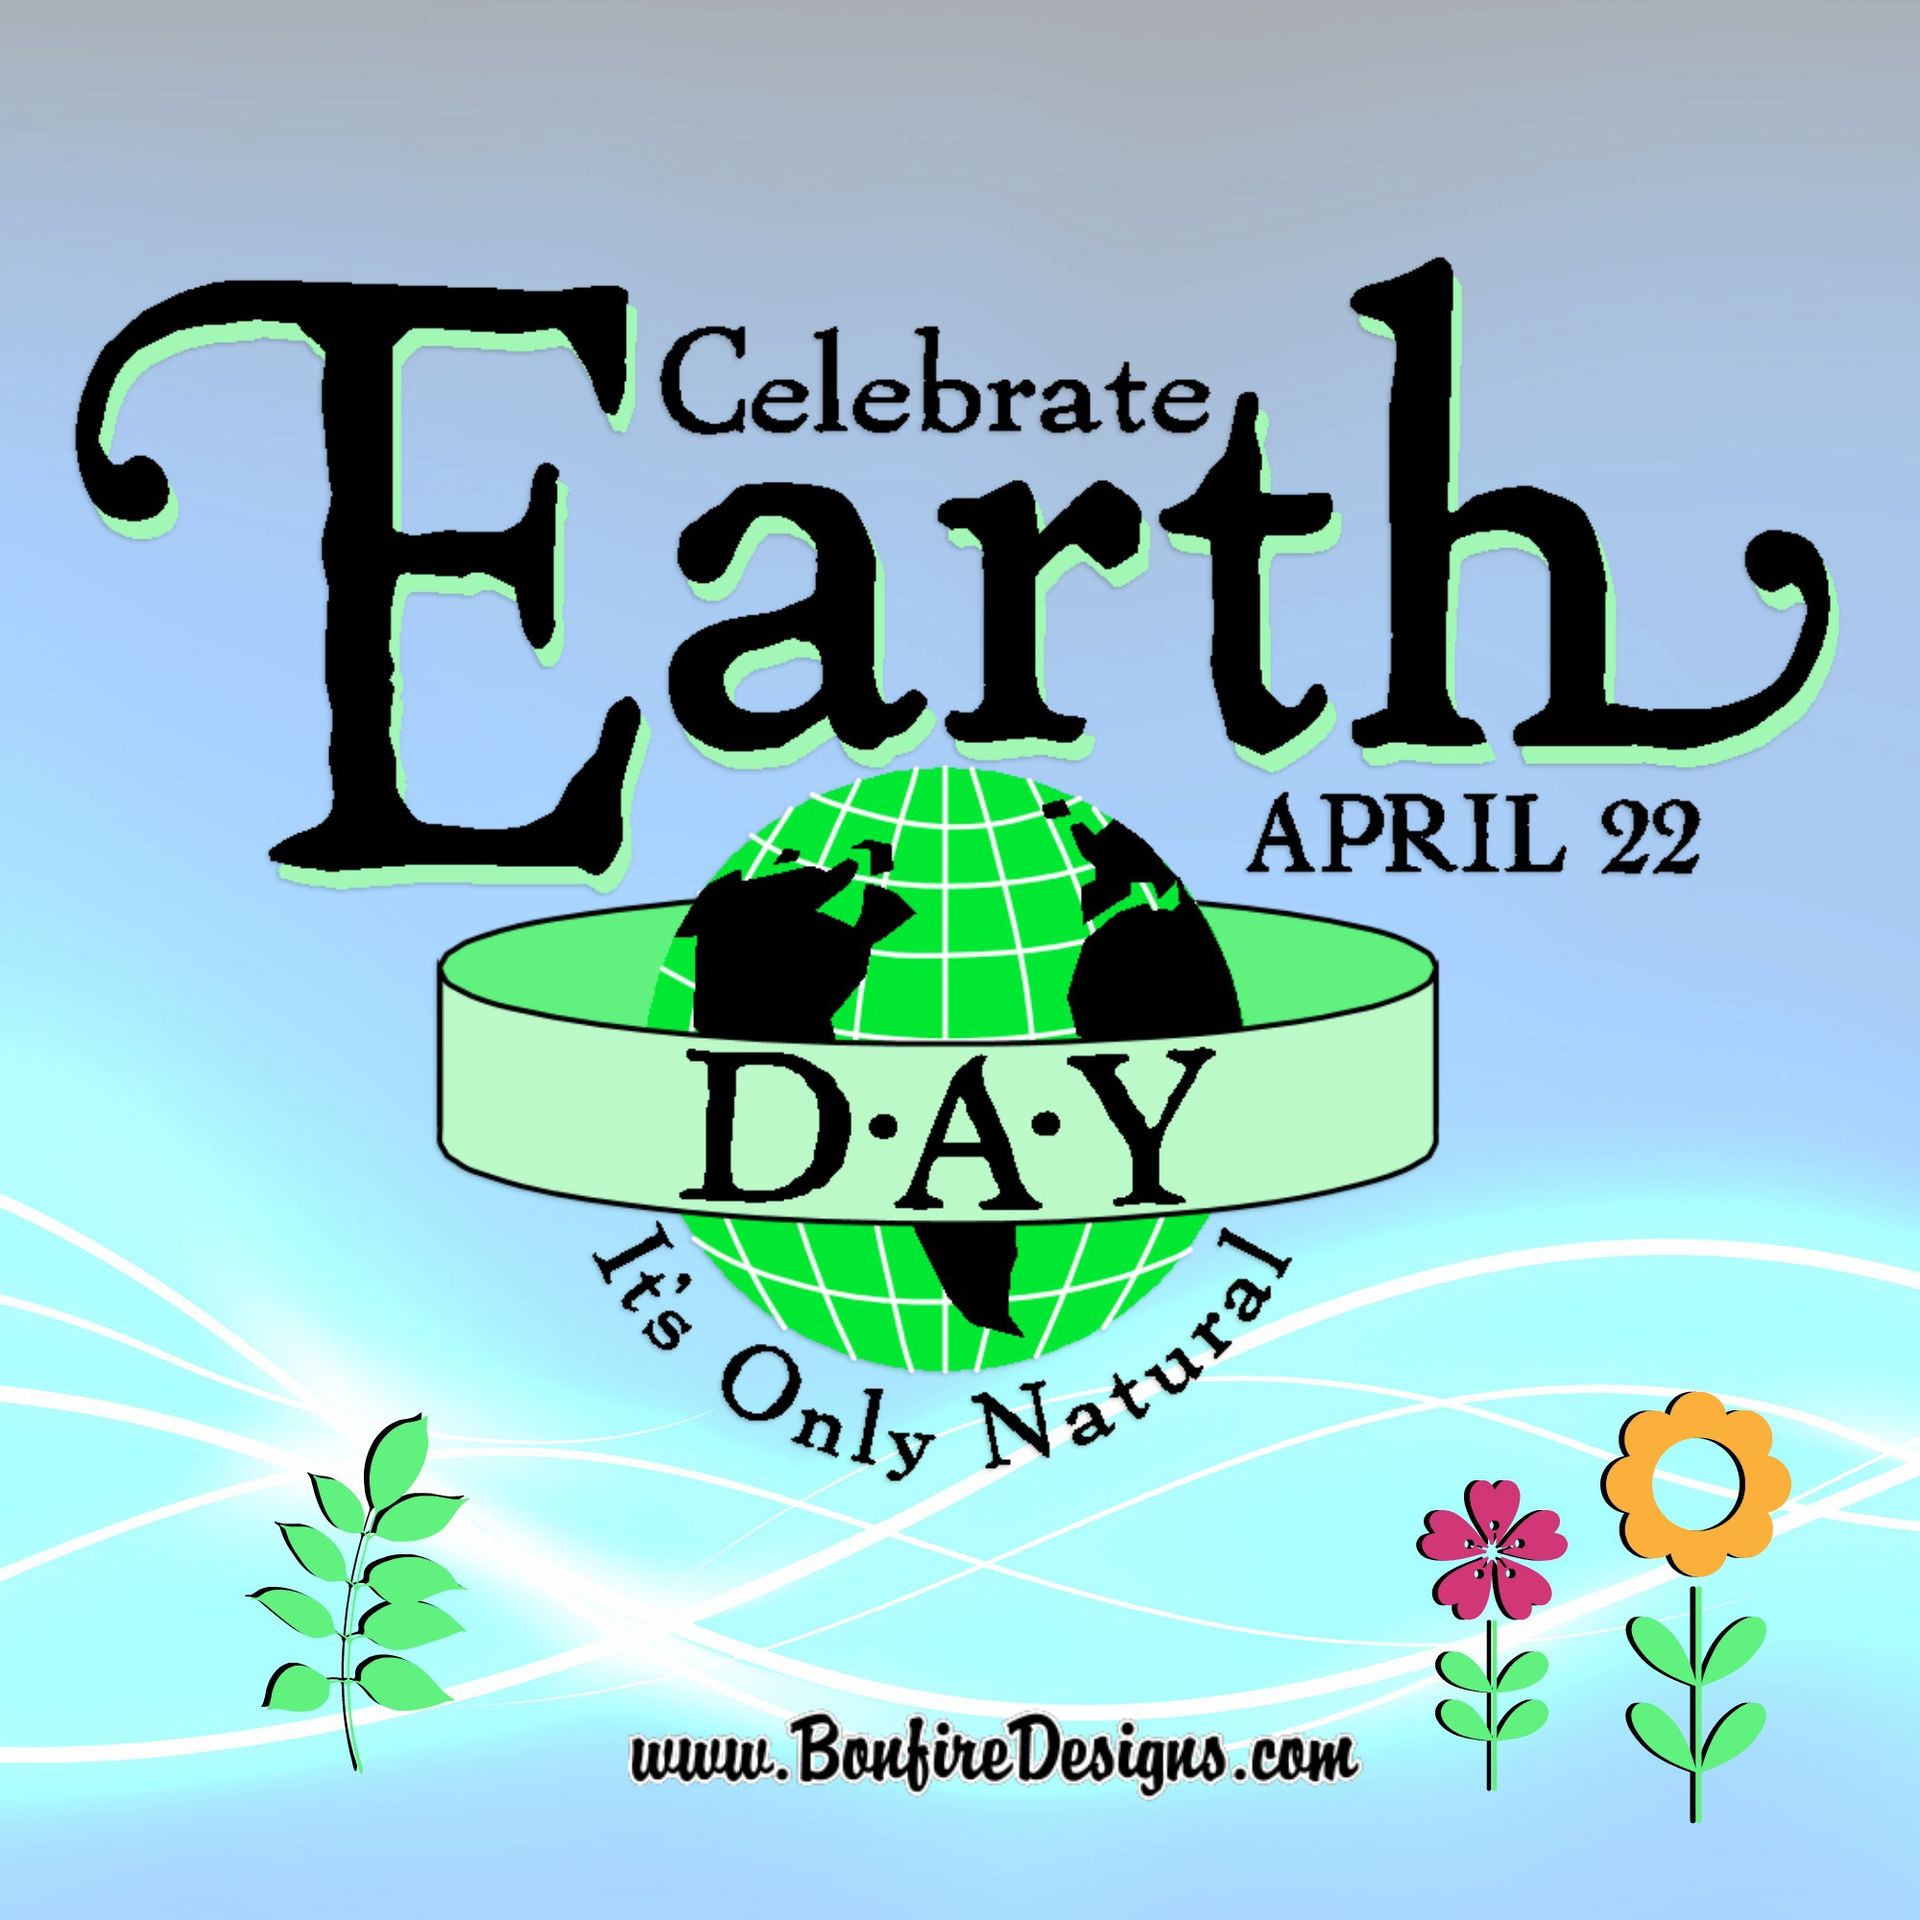 Celebrate Earth Day April 22nd